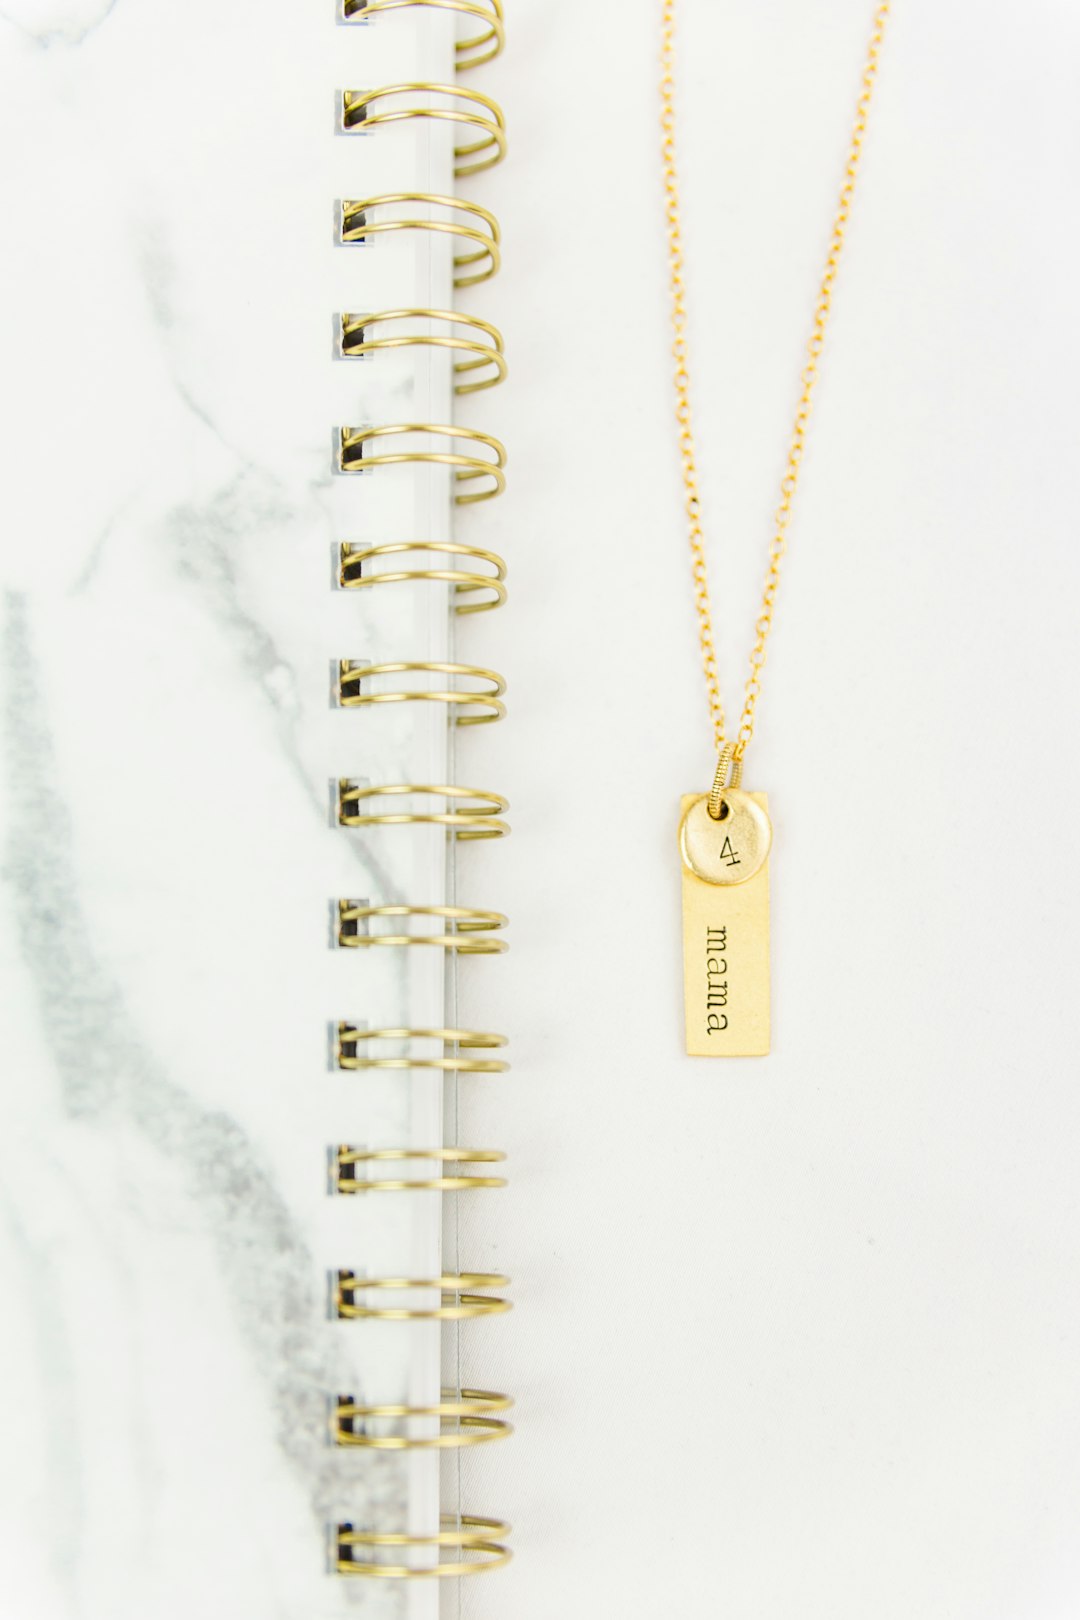 gold chain necklace on white paper